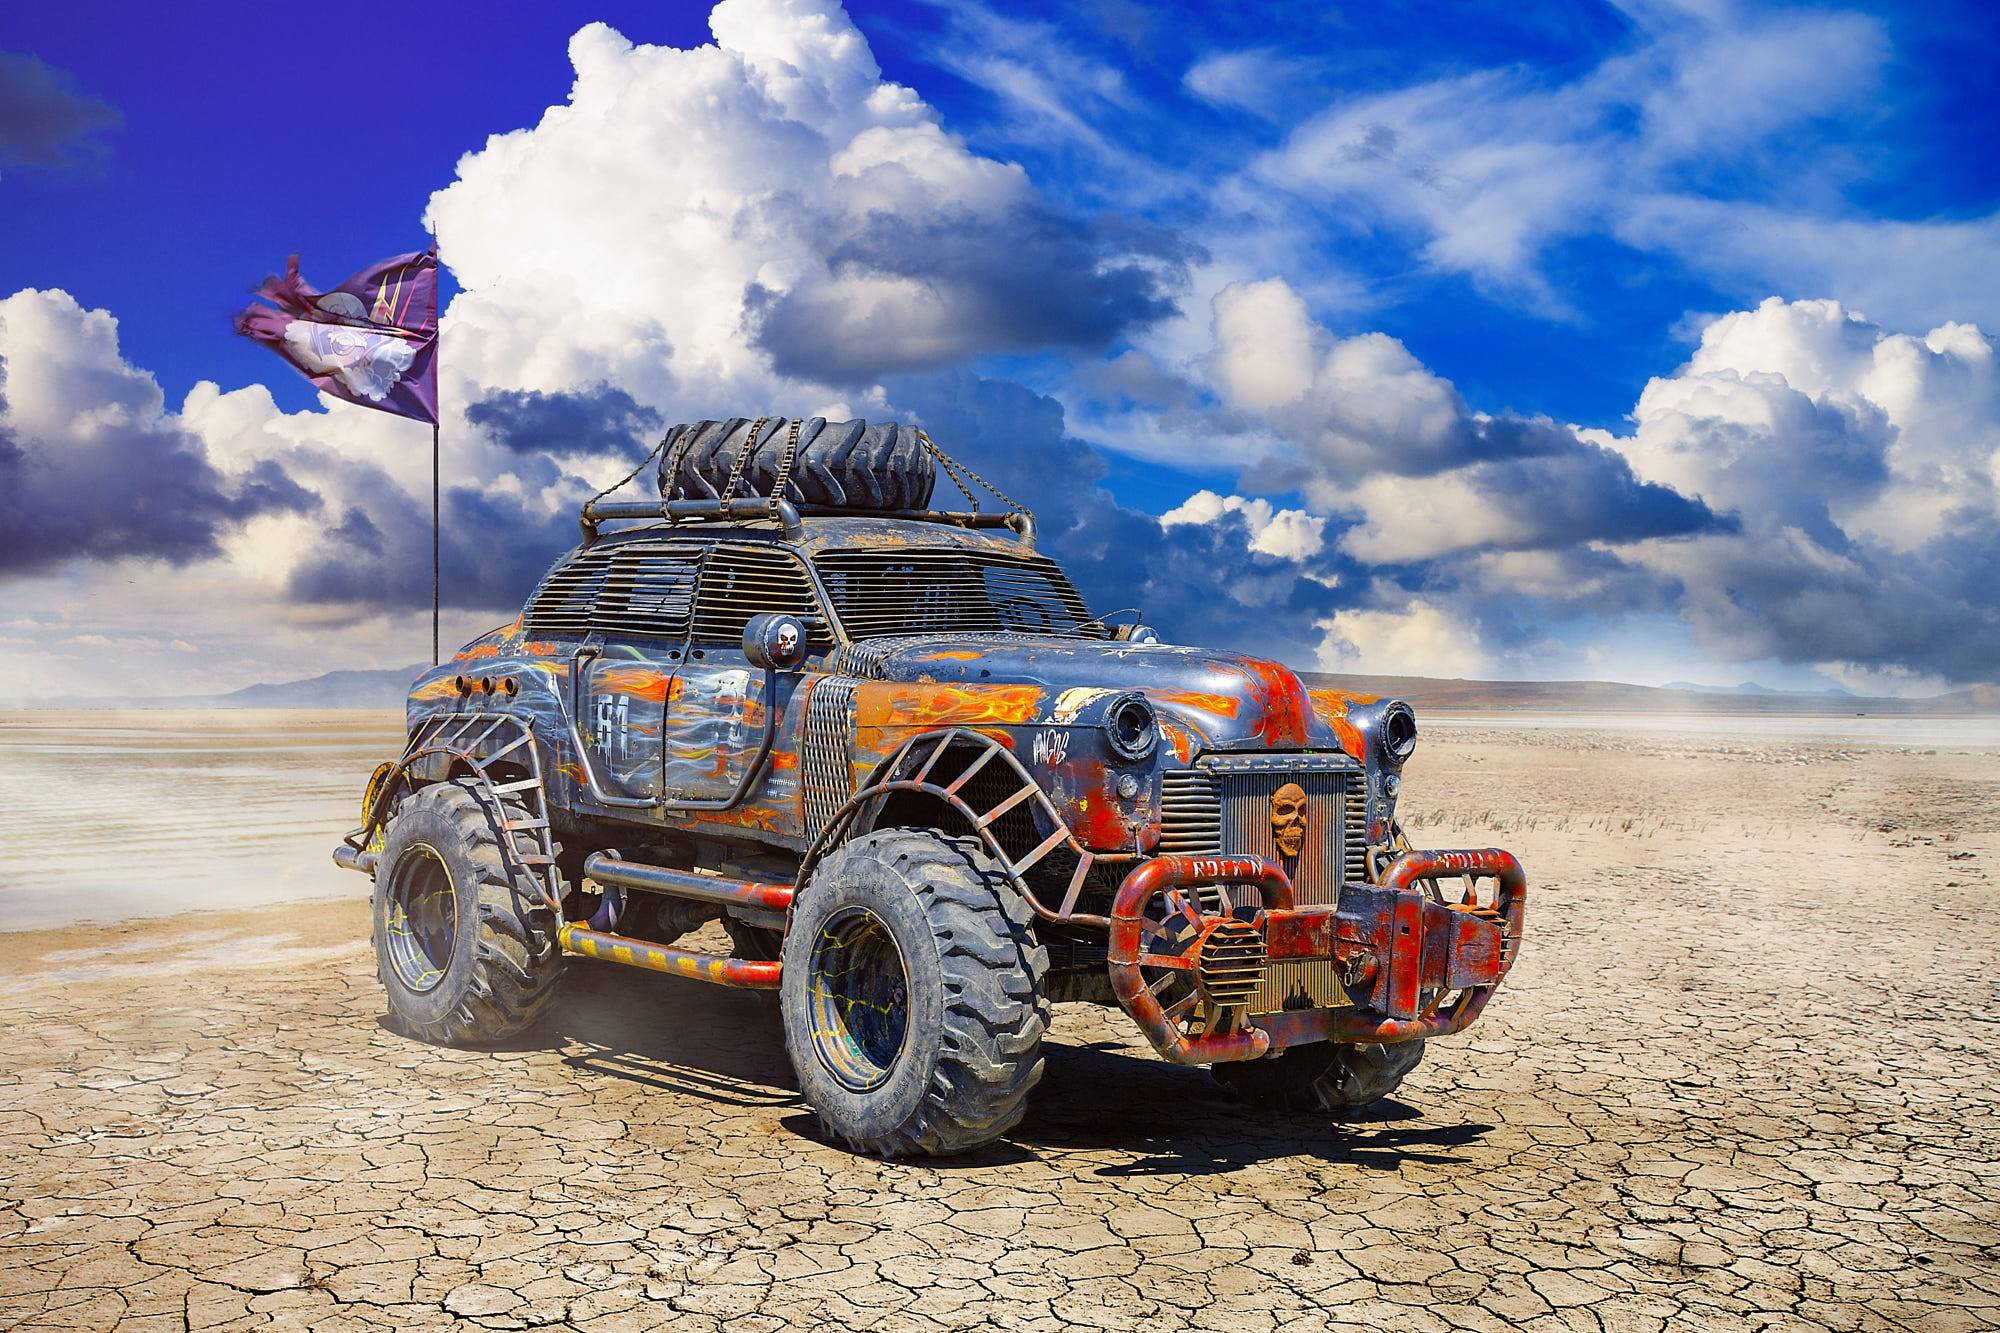 General 2000x1333 car desolate landscape apocalyptic punk flag desert sky clouds wheels chains 4x4 frontal view Ares (artist)